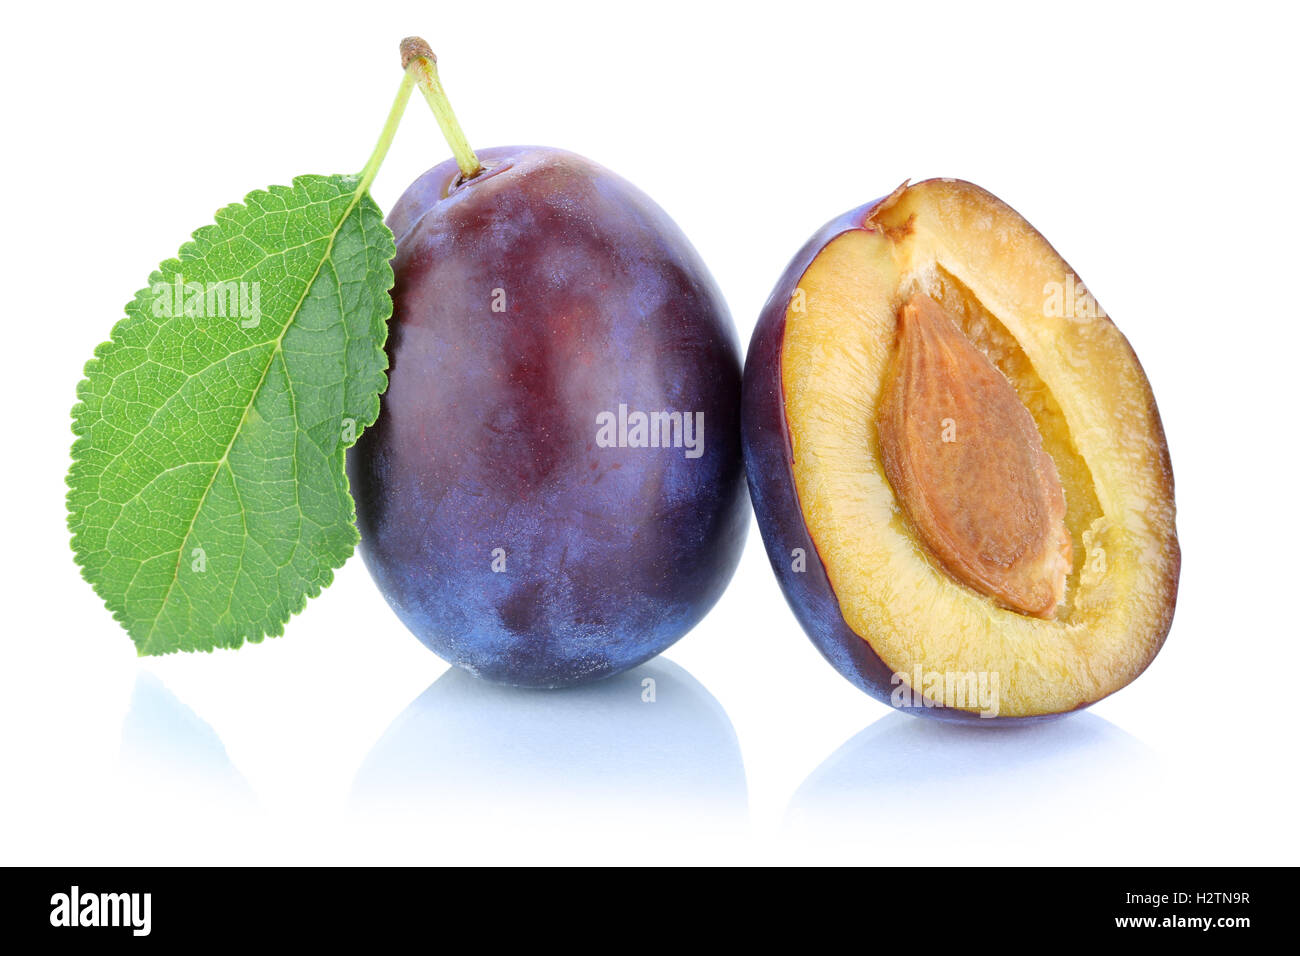 Plums plum prunes prune fresh fruit isolated on a white background Stock Photo